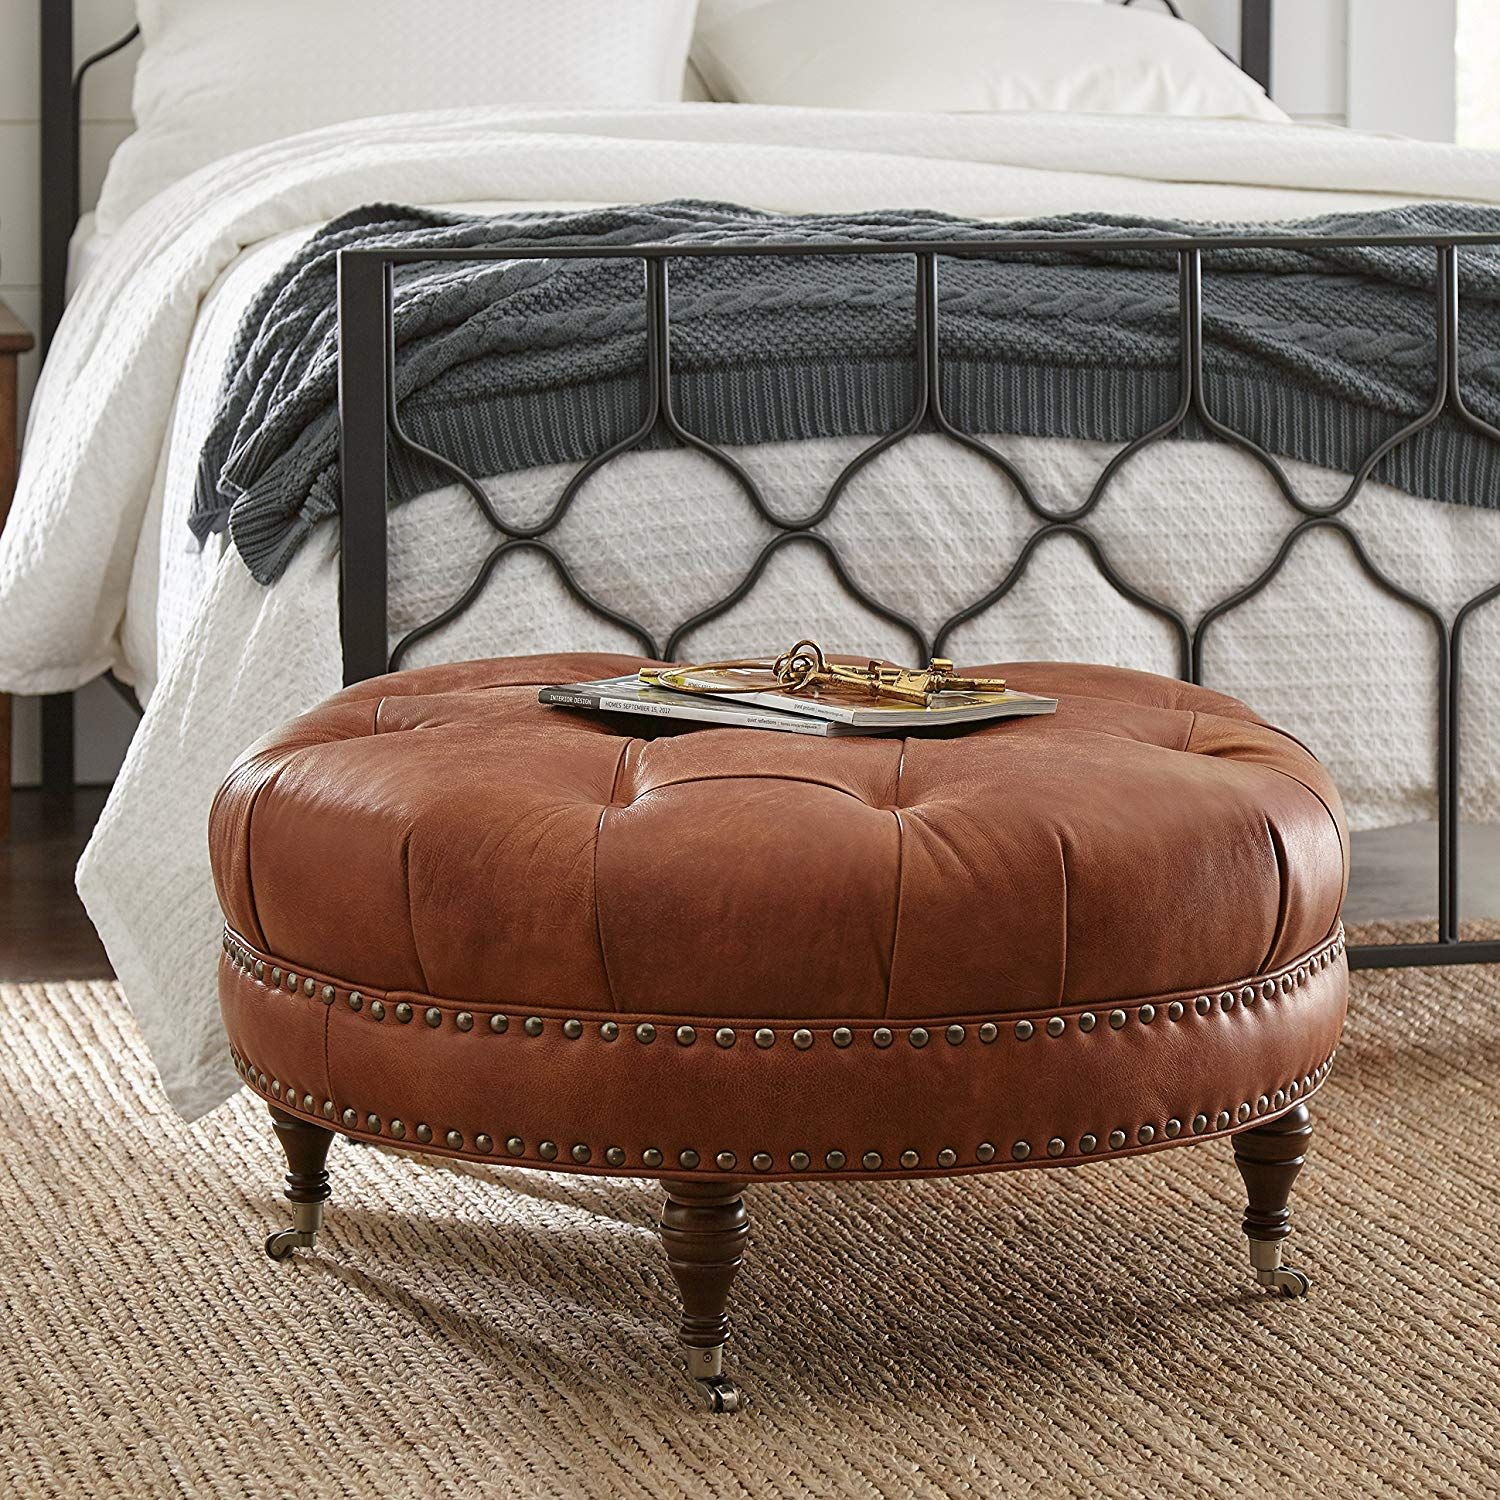 Button Tufted Round Leather Wheeled Ottoman With Spindled Wooden Legs Throughout Leather Pouf Ottomans (View 3 of 20)